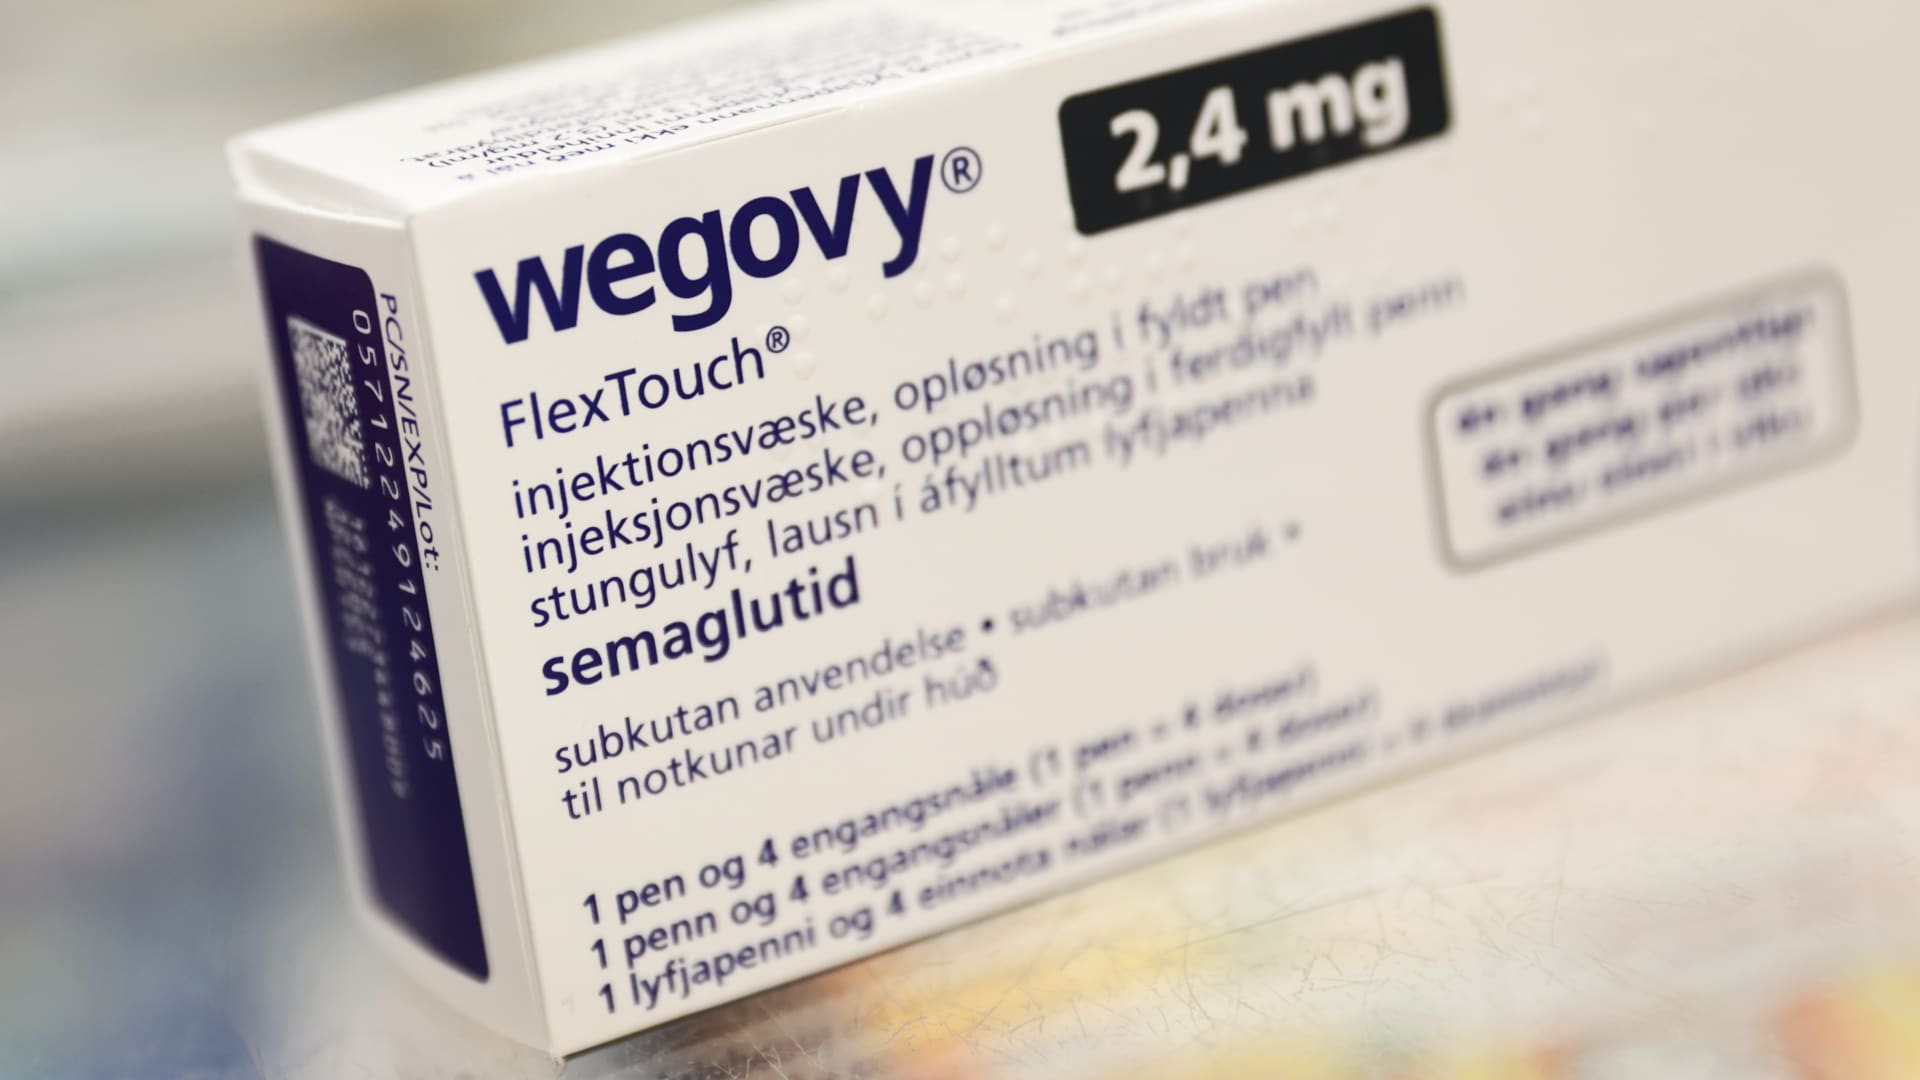 Novo Nordisk’s Wegovy weight loss drug approved in China [Video]